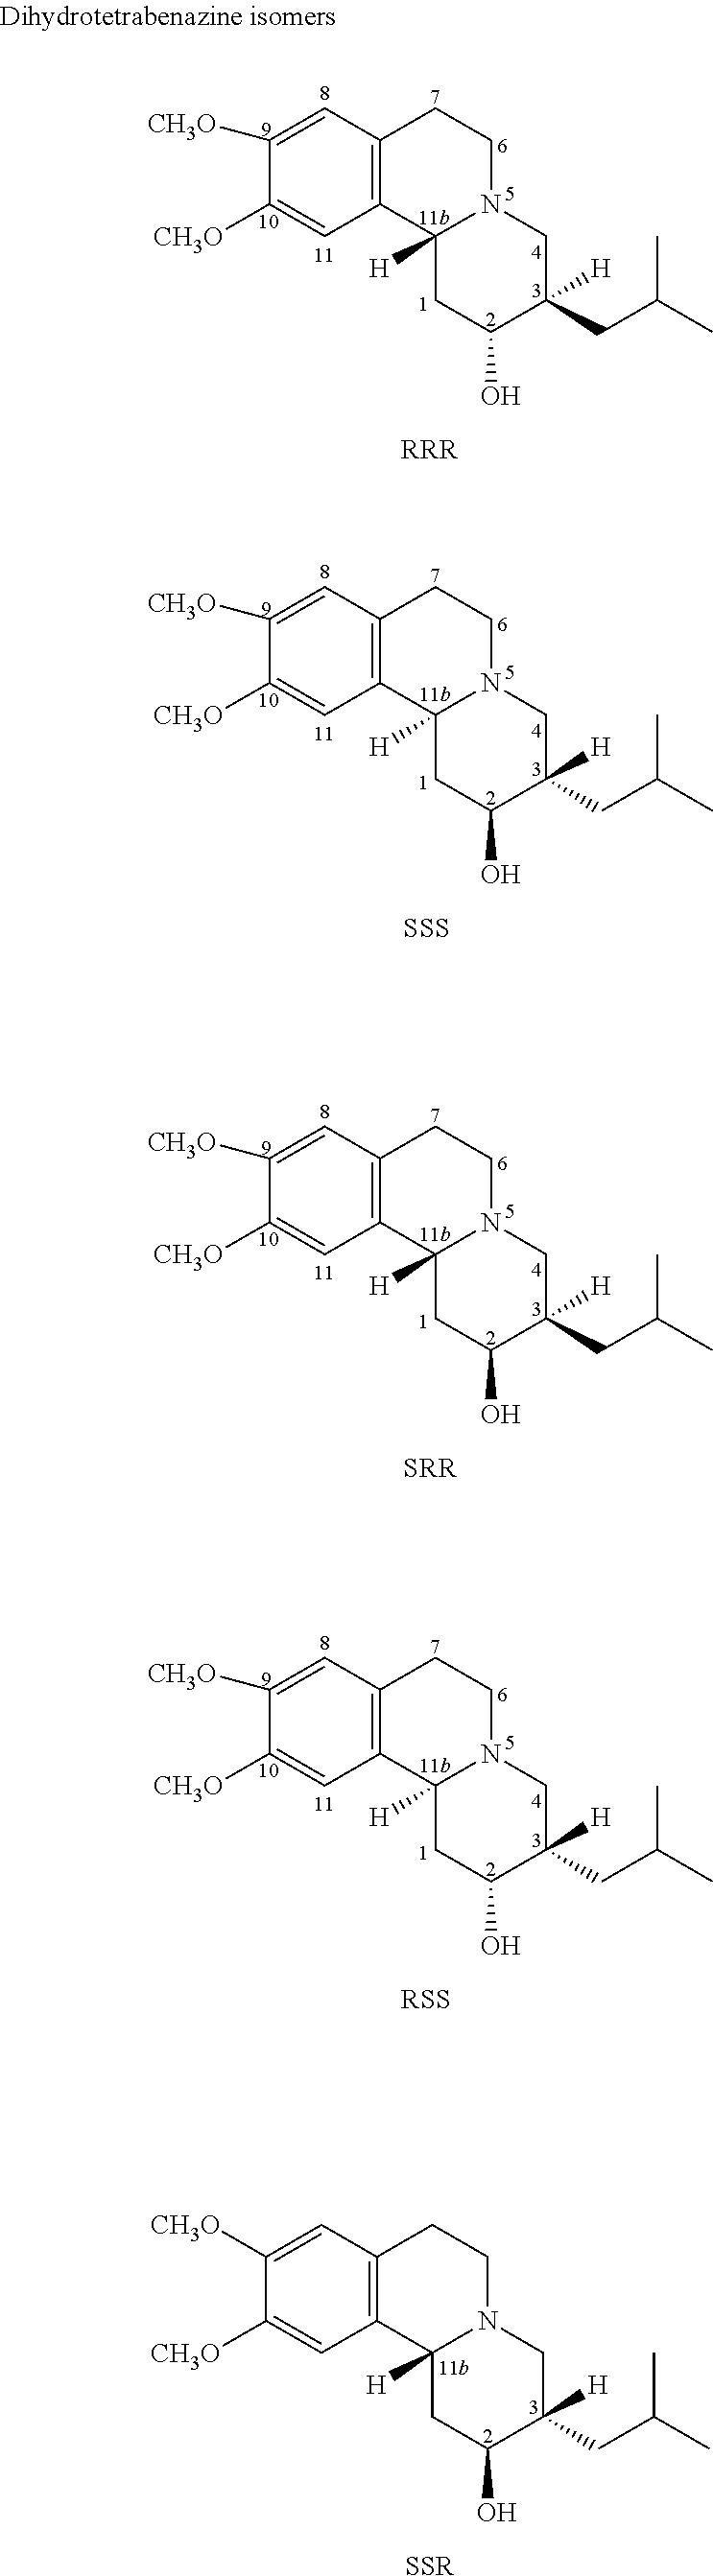 Dihydrotetrabenazine for the treatment of anxiety and psychoses